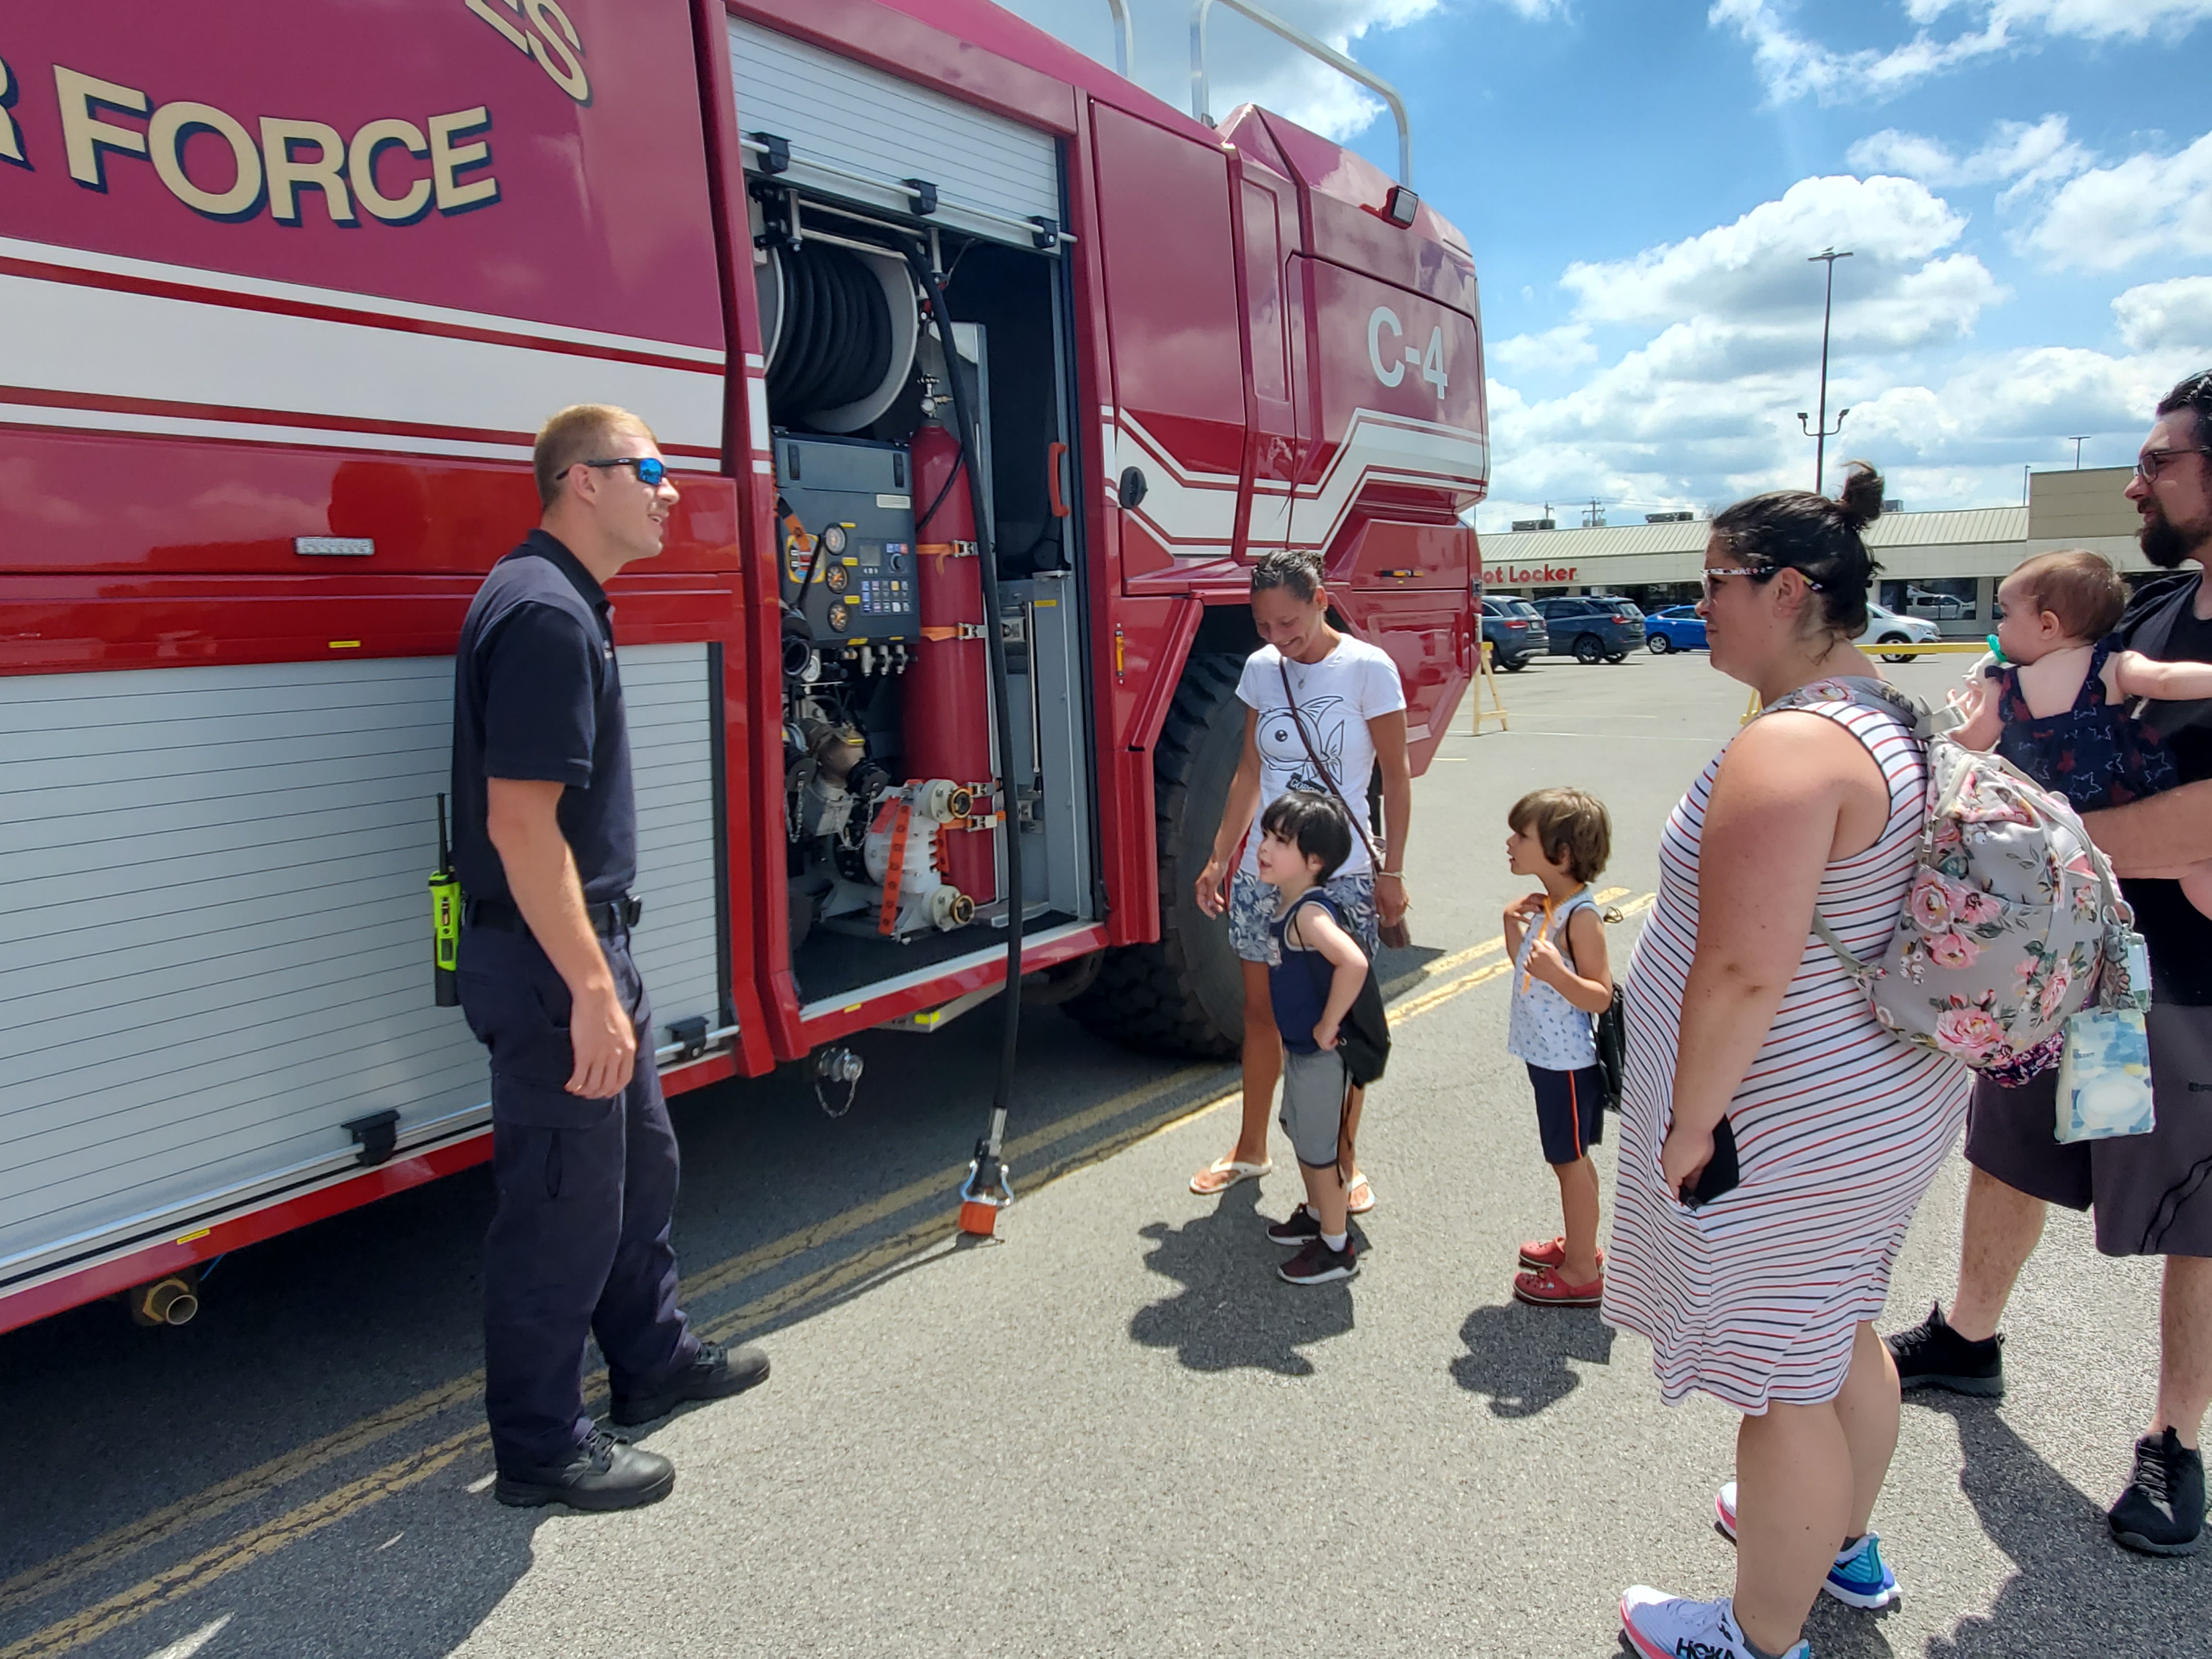 Families interacting with a firefighter at a previous Touch-a-Truck event, at Fashion Outlets of Niagara Falls USA.